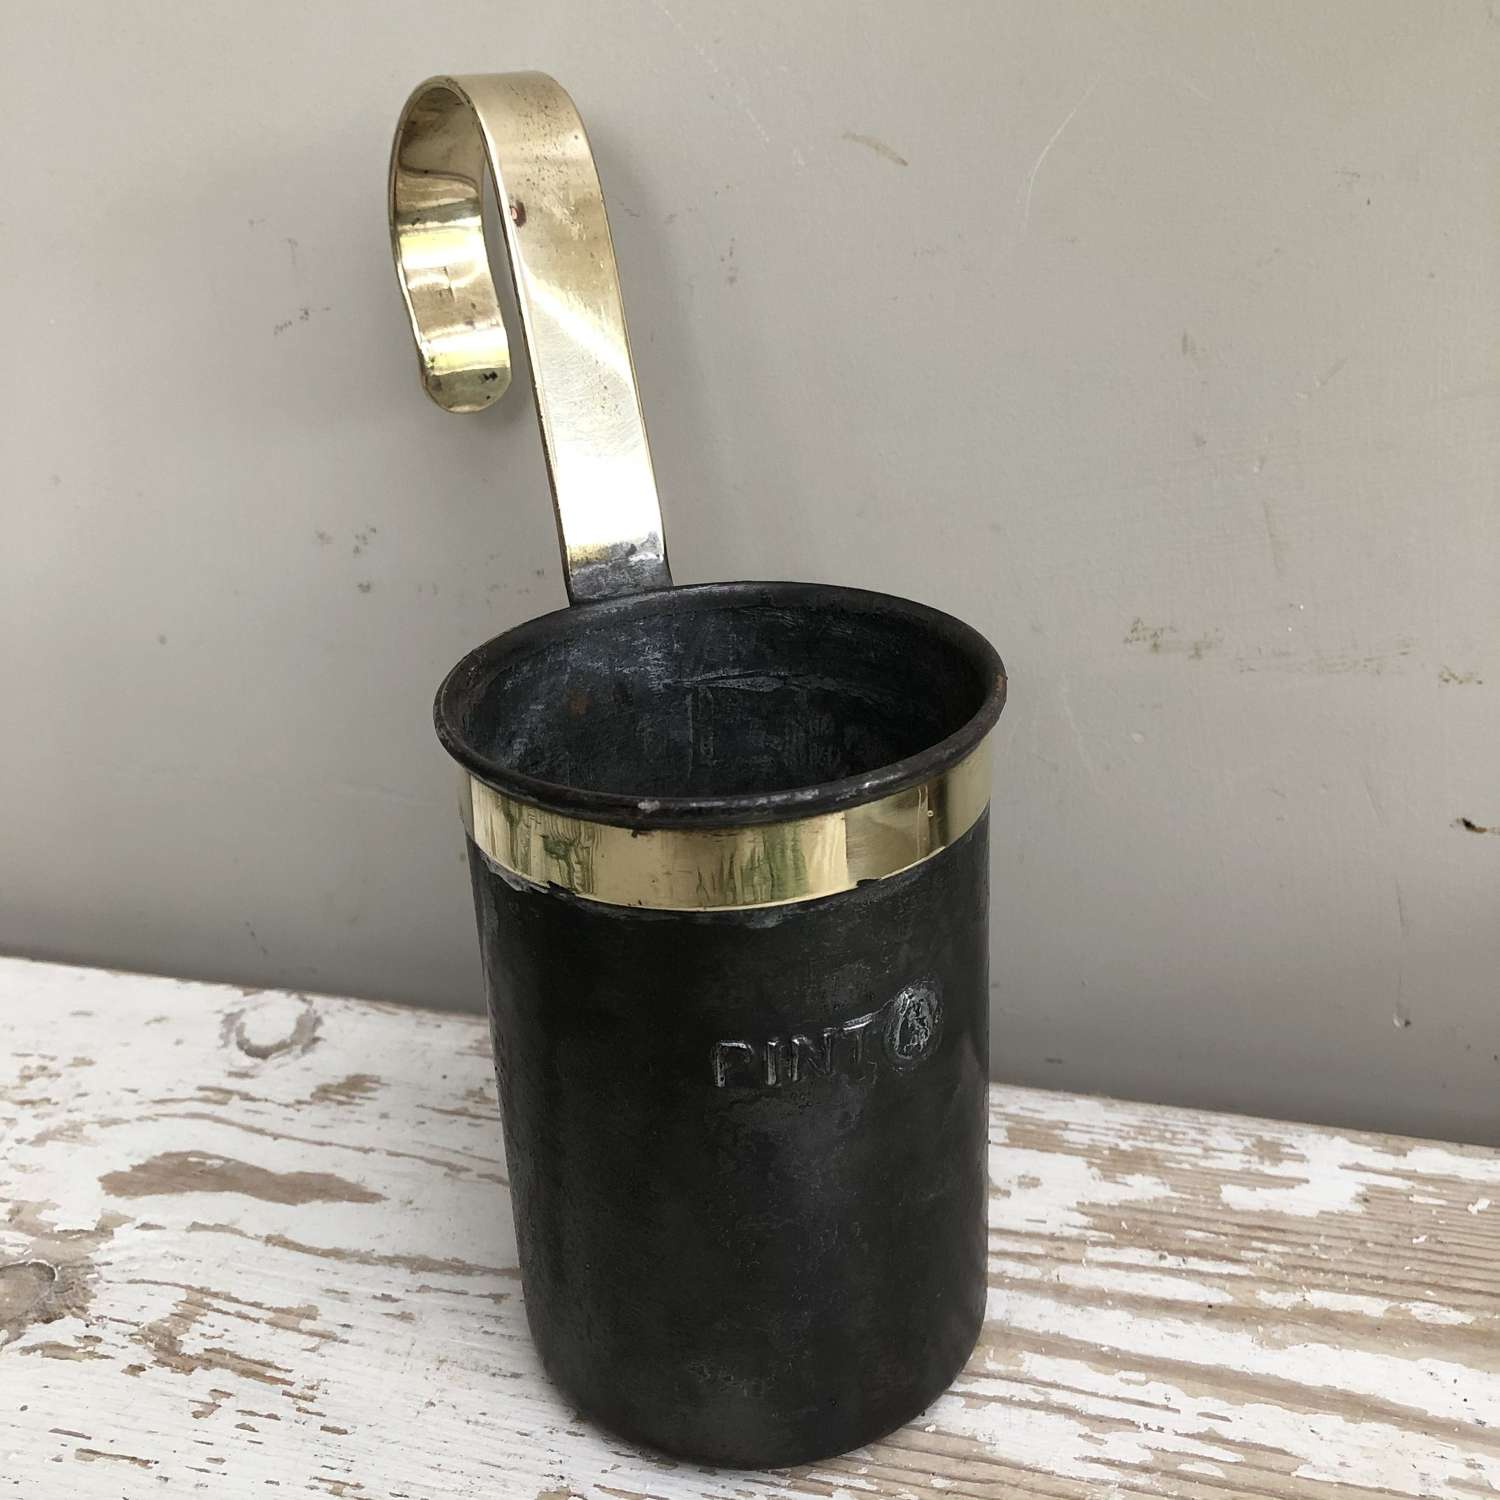 1 Pint Lister Milk Measure with brass collar